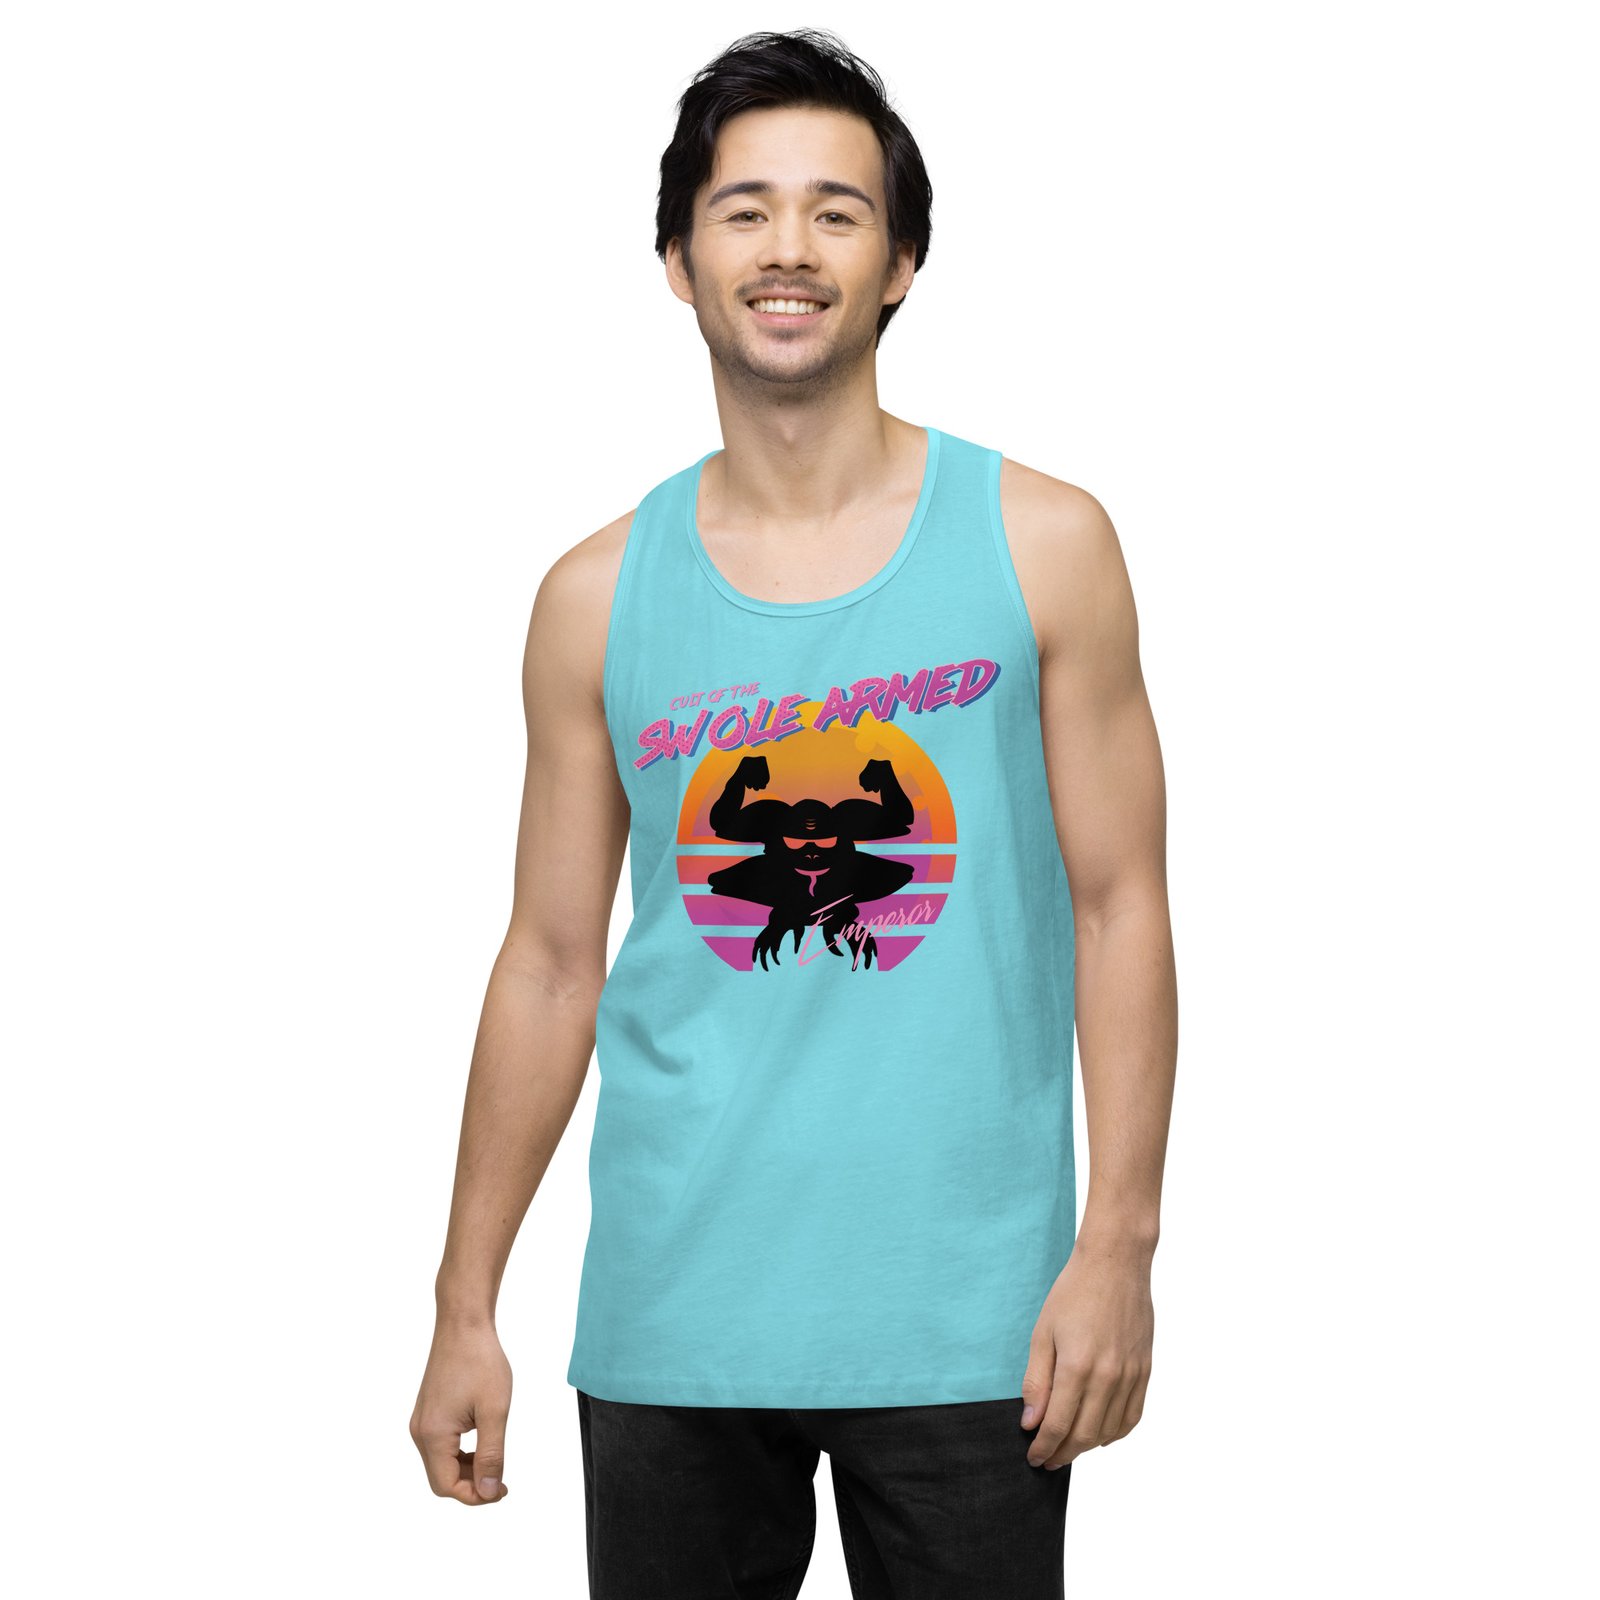 Cult of the Swole Armed Emperor Tank Top (4 Him) | 40k Badcast